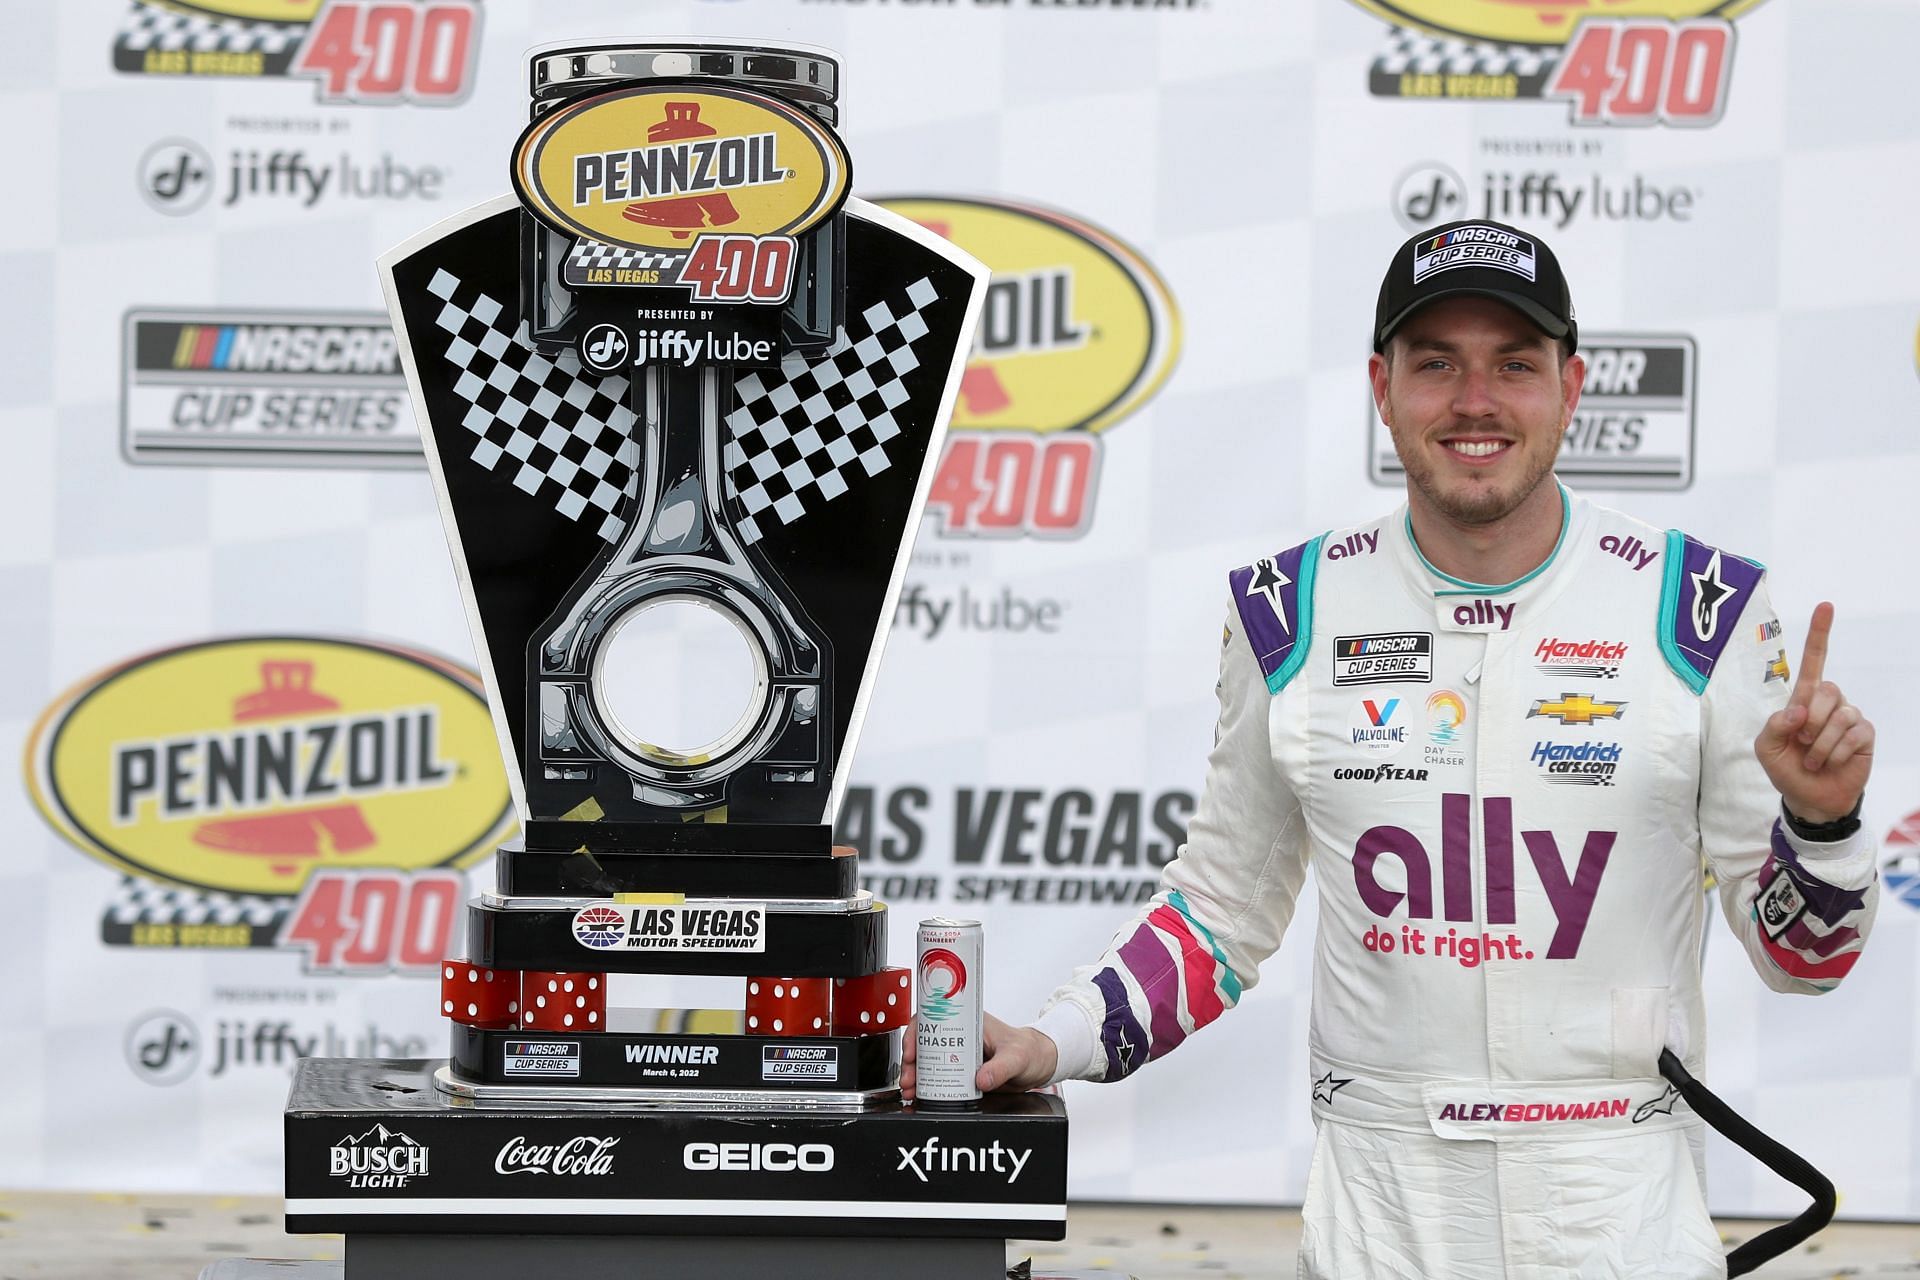 Alex Bowman, driver of the #48 Ally Chevrolet, celebrates in victory lane after winning the NASCAR Cup Series Pennzoil 400 at Las Vegas Motor Speedway (Photo by Meg Oliphant/Getty Images)